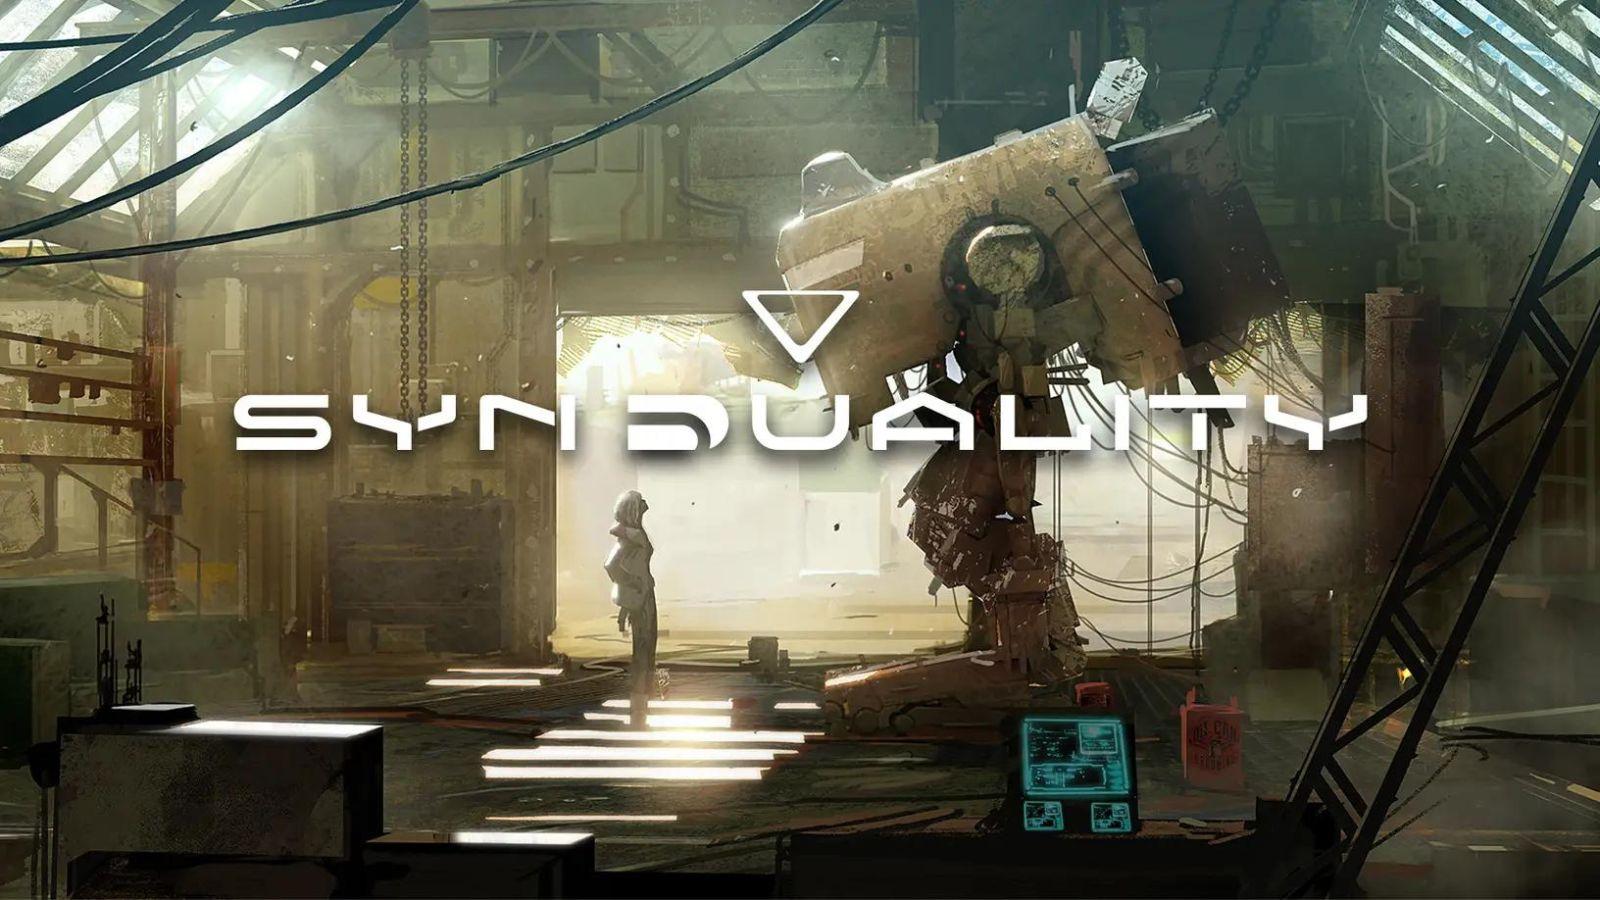 Synduality character facing mech, with logologo